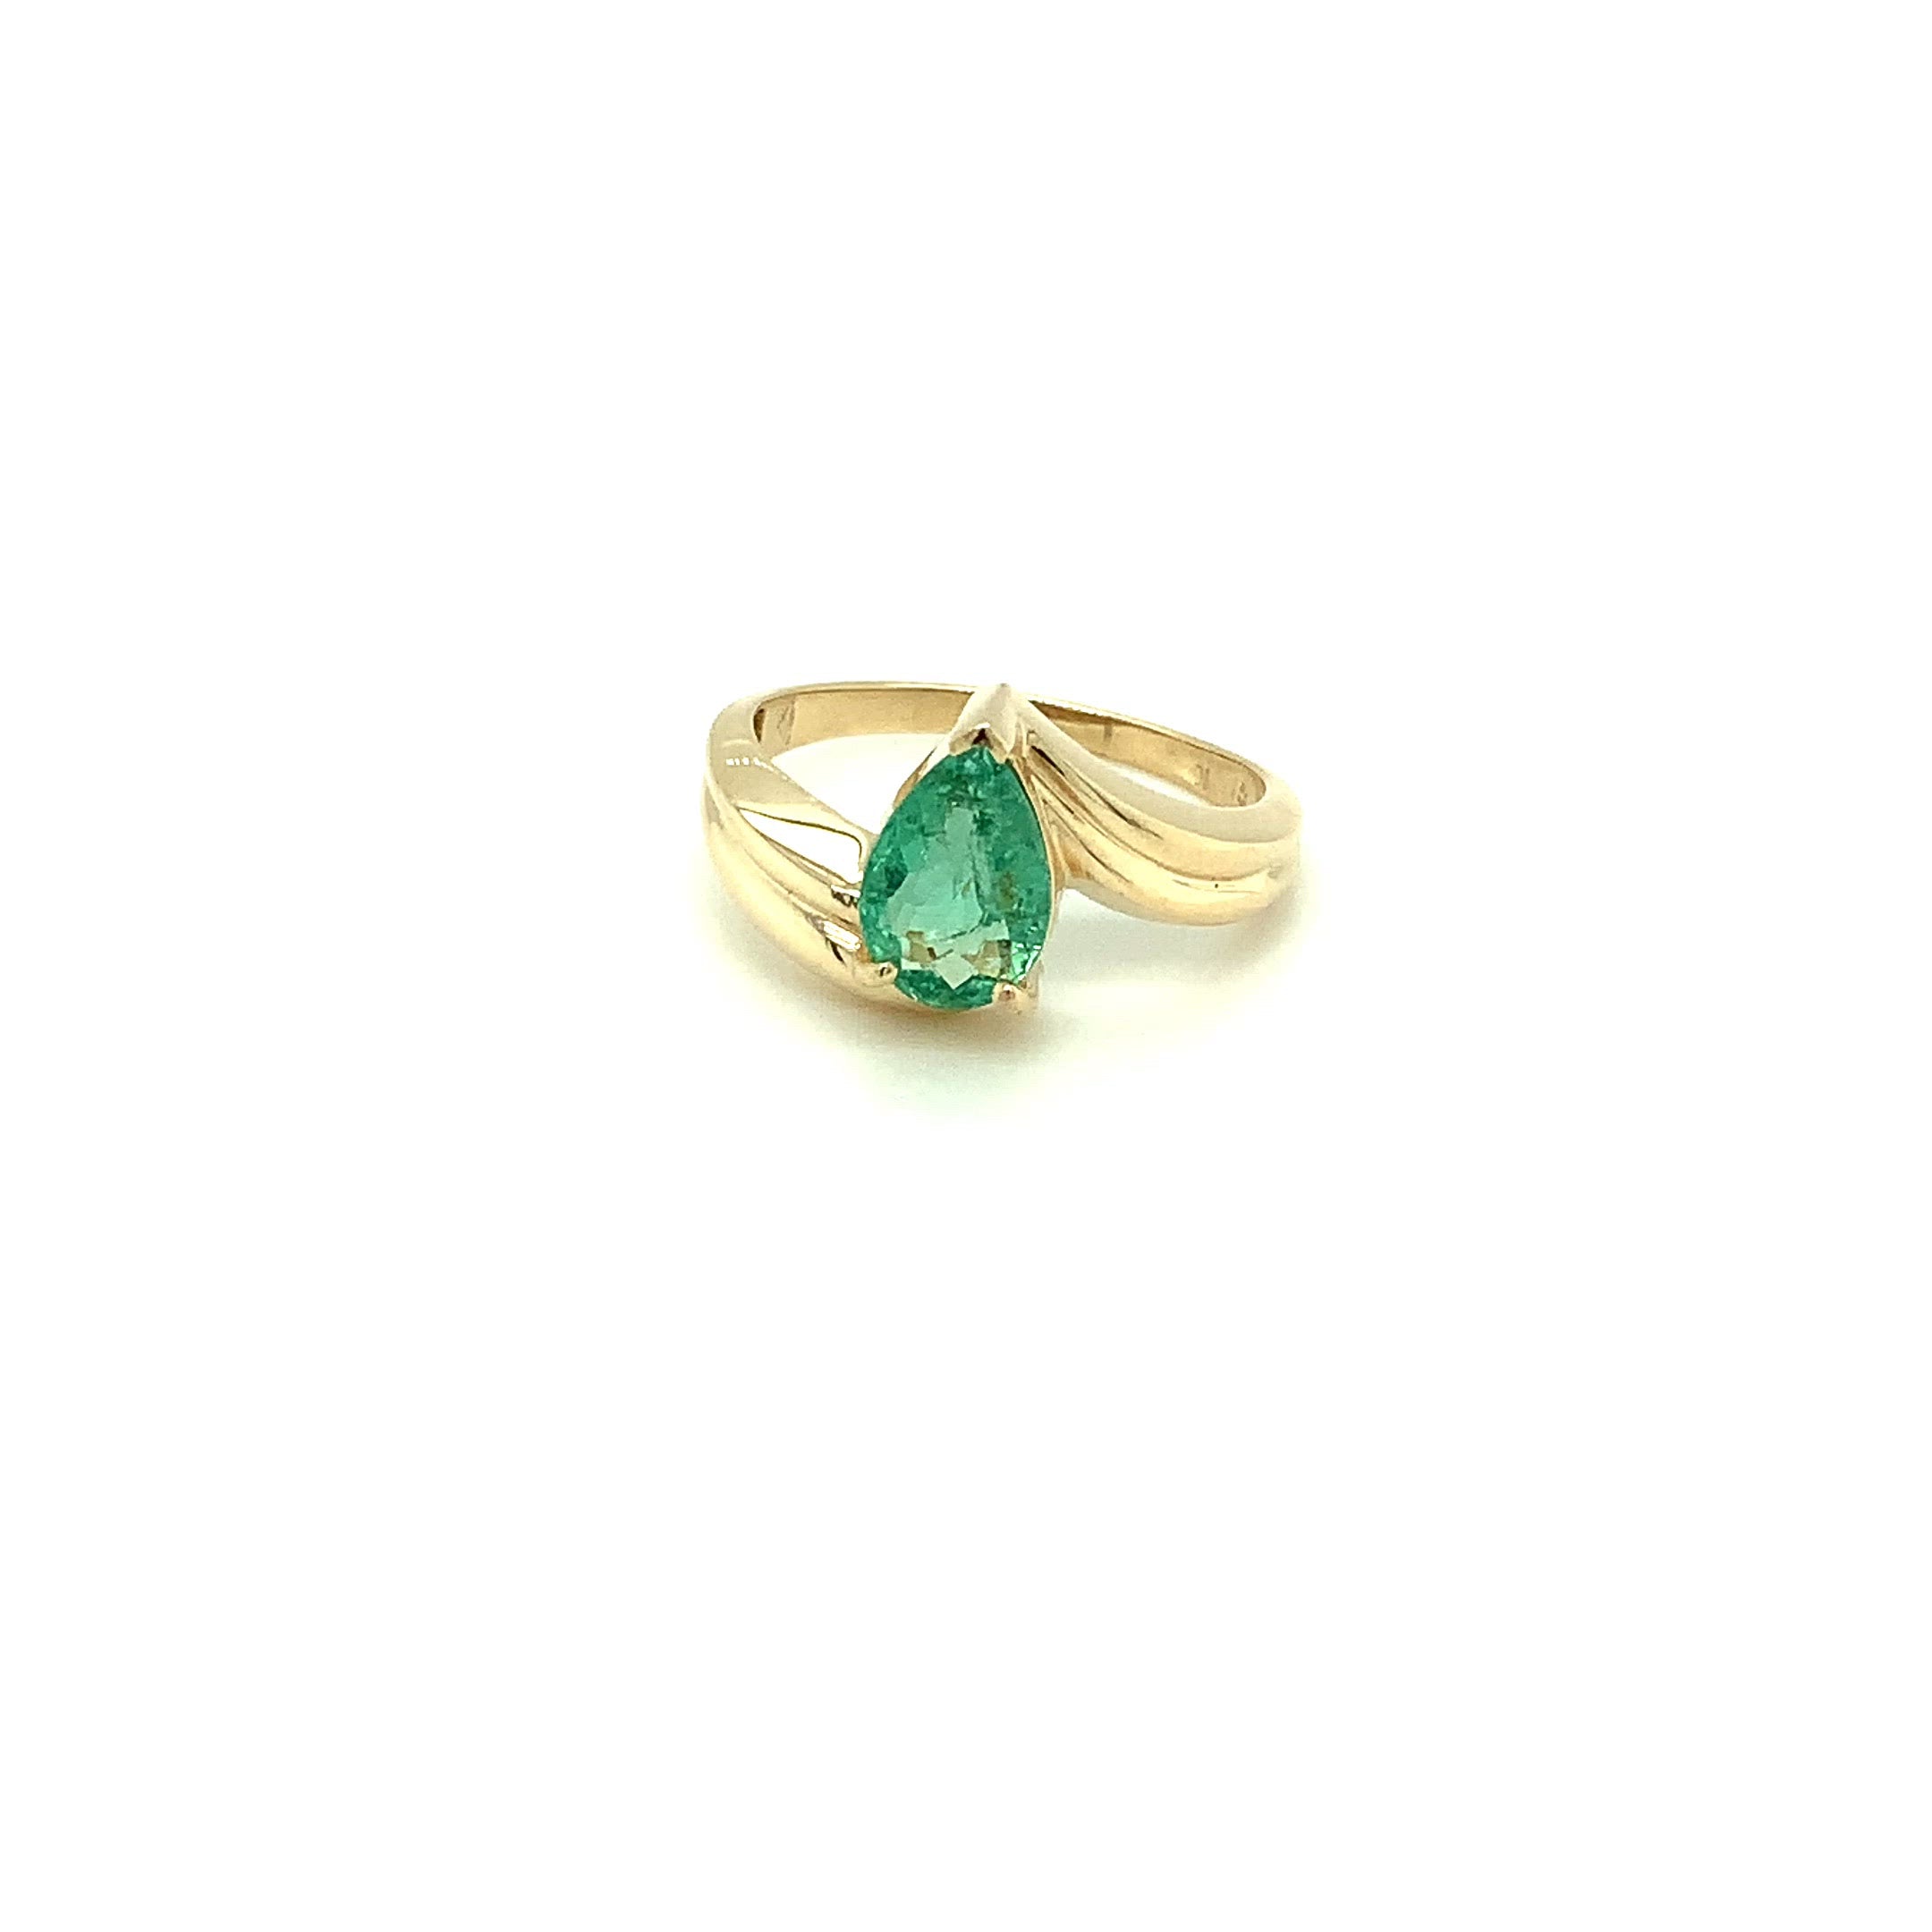 Natural Paraiba Tourmaline Ring 10K Solid Gold 1.32ct Solitaire Ring Pear Ring Gemstone Ring Women's Ring Ladies Ring Statement Ring Jewelry